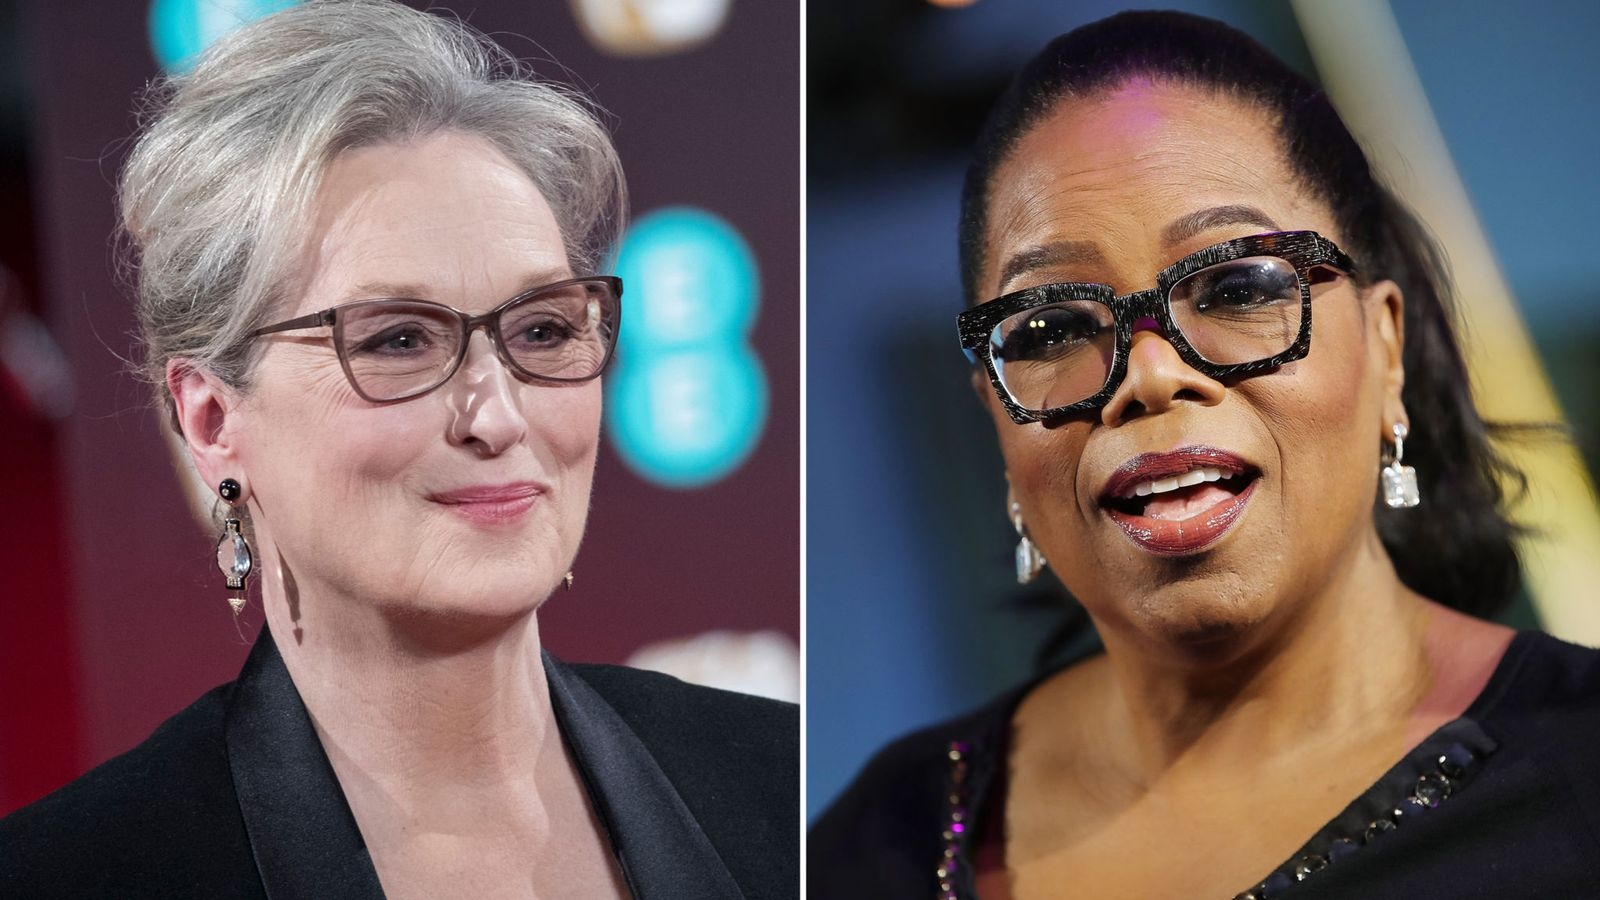 Oprah Winfrey and Meryl Streep putting world leaders ‘on notice’ over gender equality